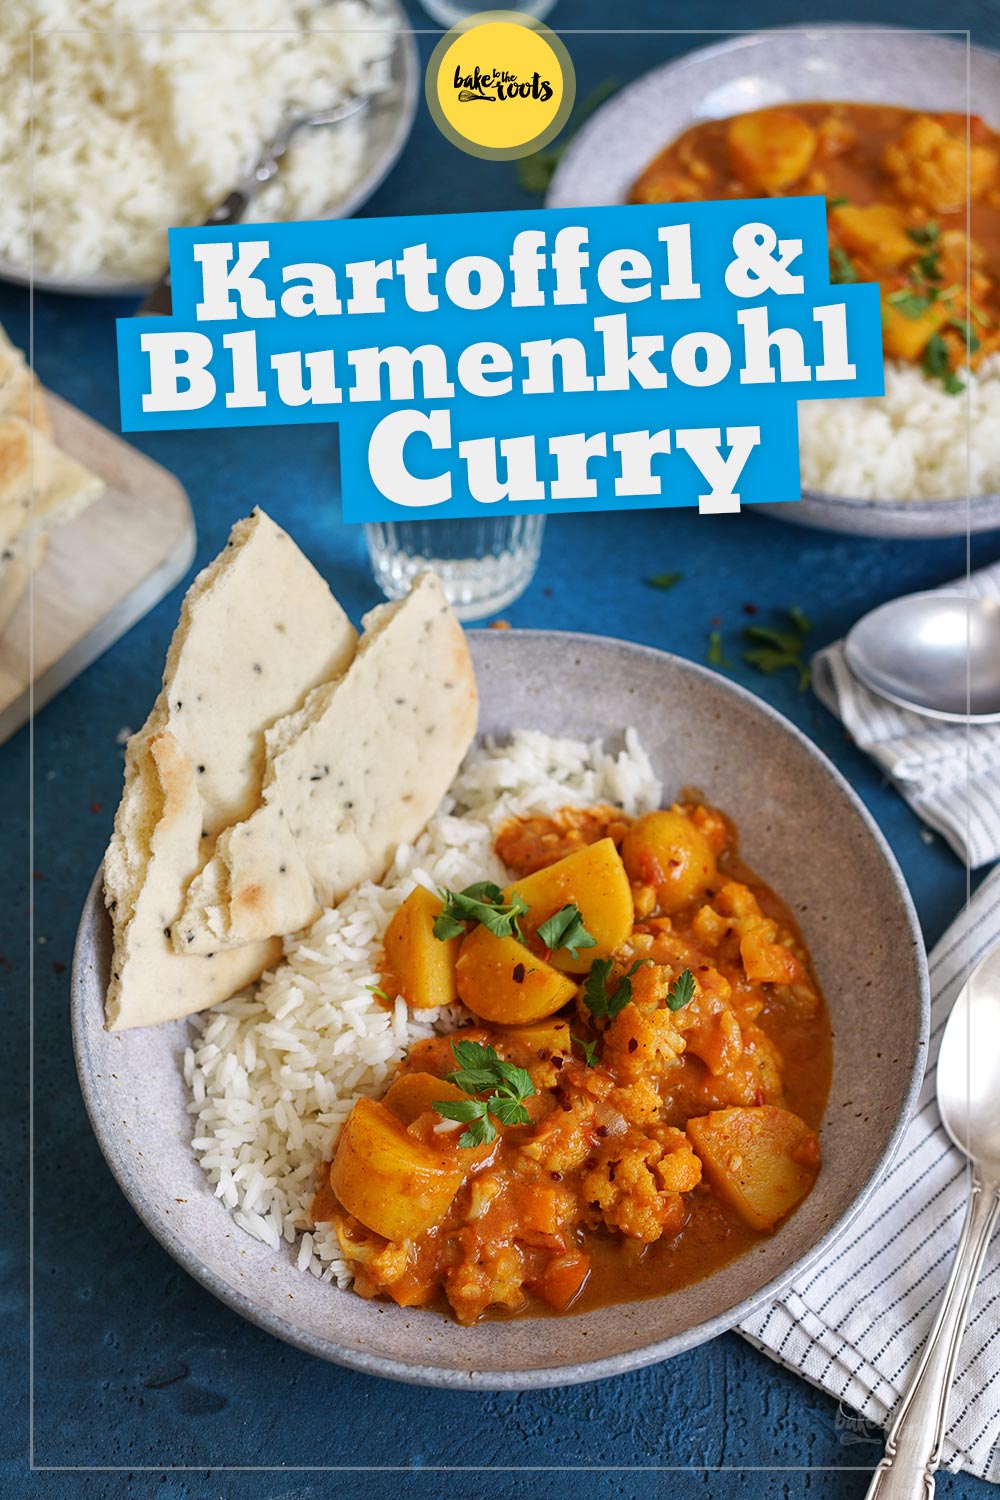 Kartoffel Blumenkohl Curry | Bake to the roots